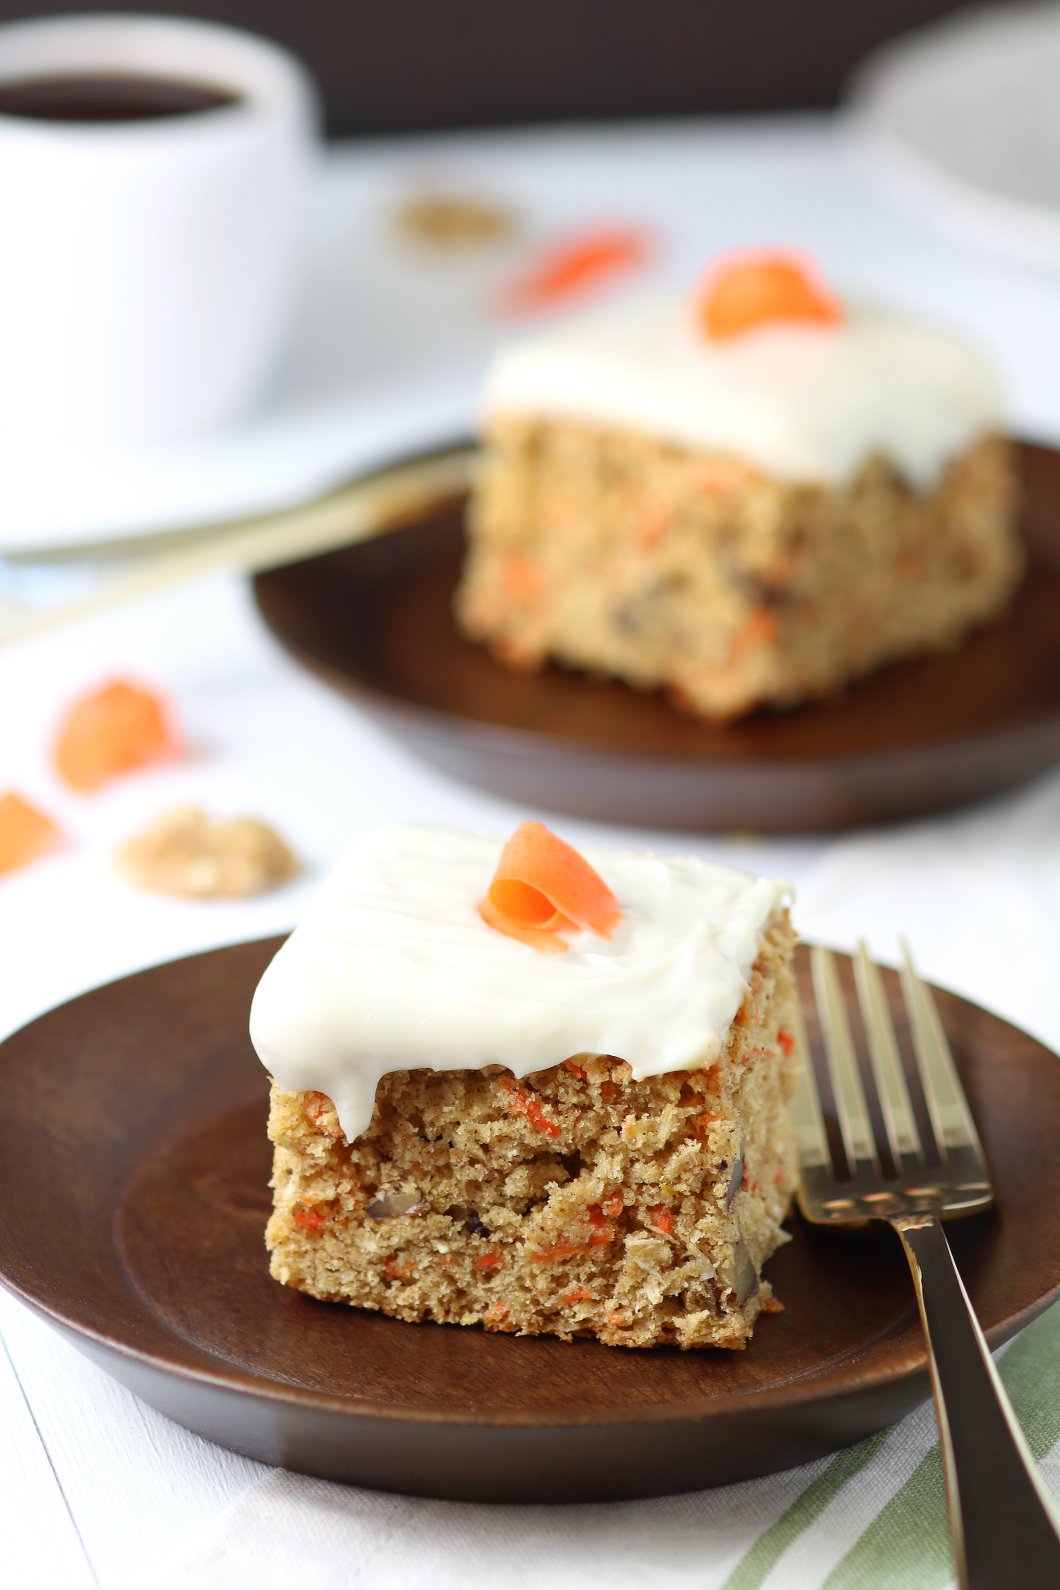 A versatile recipe featuring warm spices, coconut, and walnut to make this moist Vegan Carrot Cake with Cream Cheese Frosting irresistible.